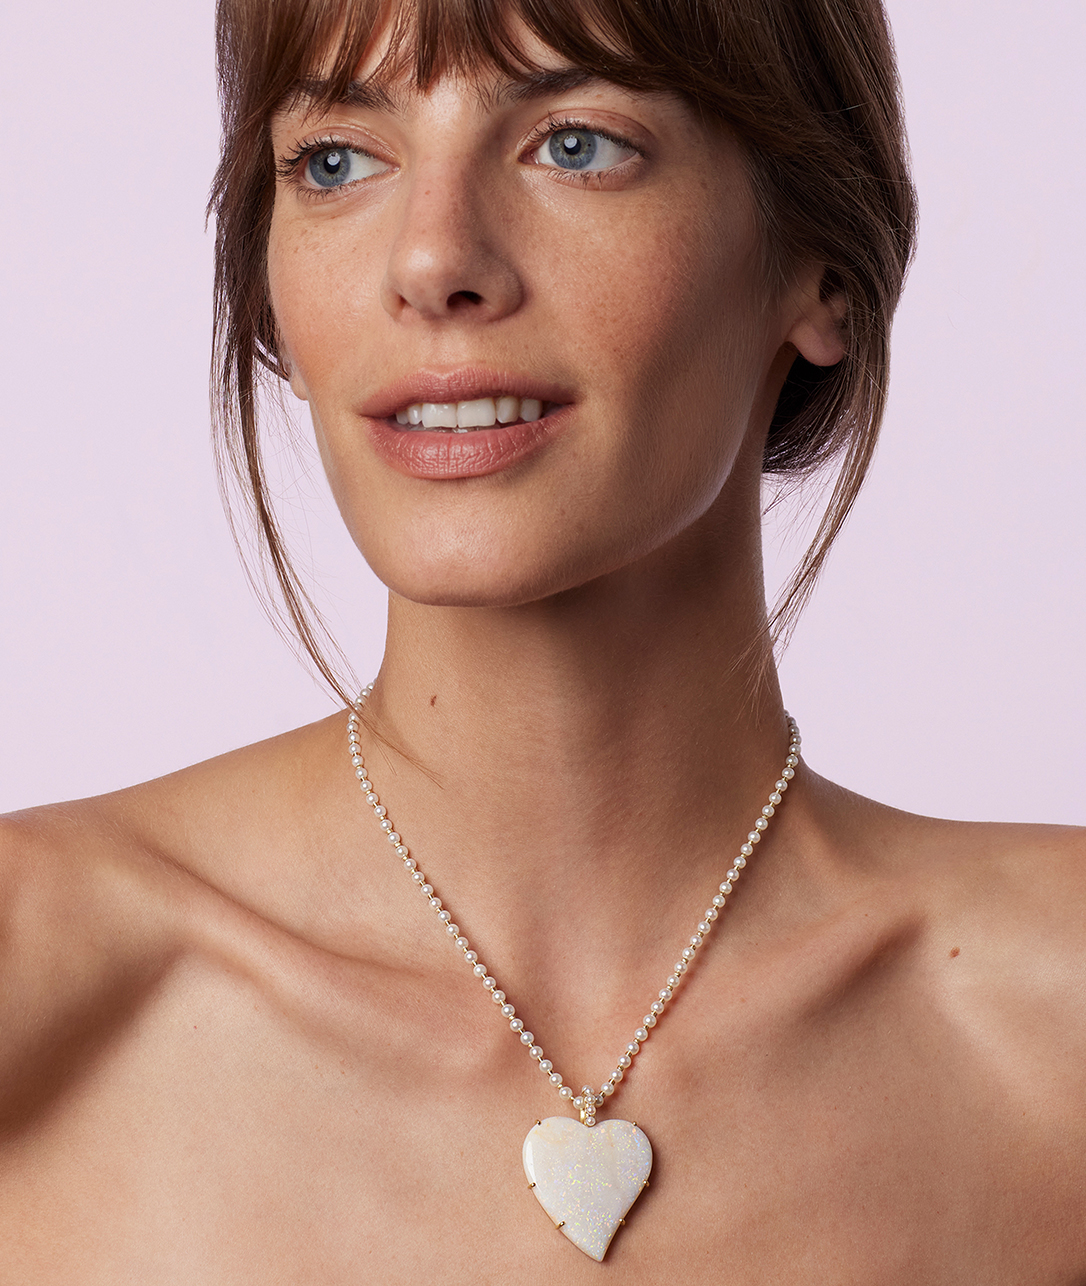 Capture all of the romance of a wedding weekend in a One of a Kind Opal Love Necklace.SHOP OPAL LOVE